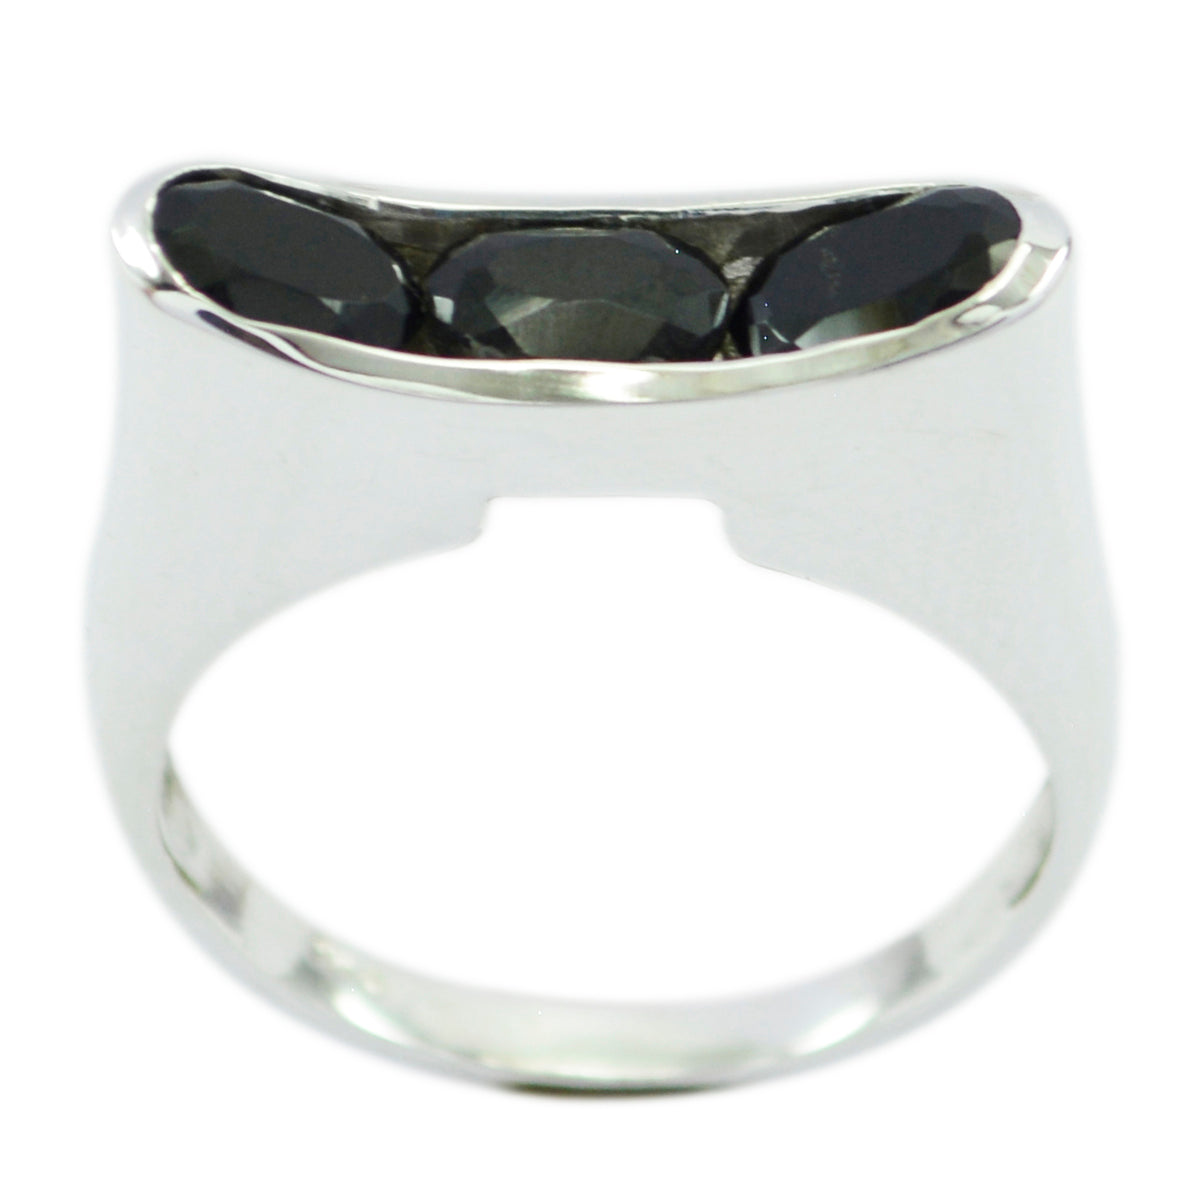 Very Nice Stone Black Onyx 925 Sterling Silver Rings Jewelry Box Store